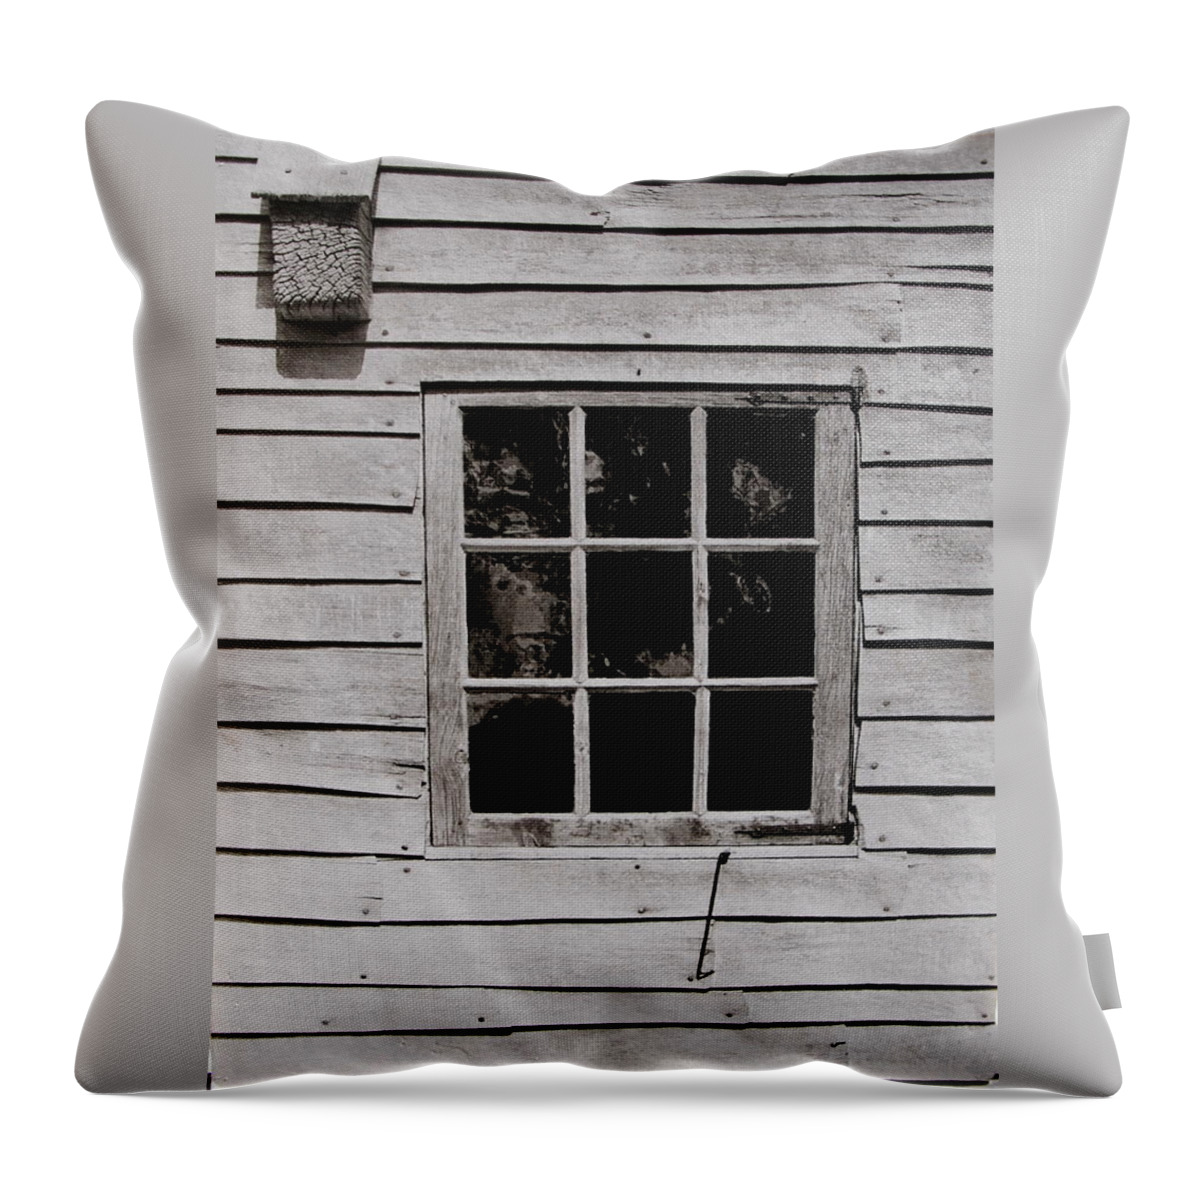 Ephrata Cloisters Throw Pillow featuring the photograph Ephrata Cloisters Window by Jacqueline M Lewis